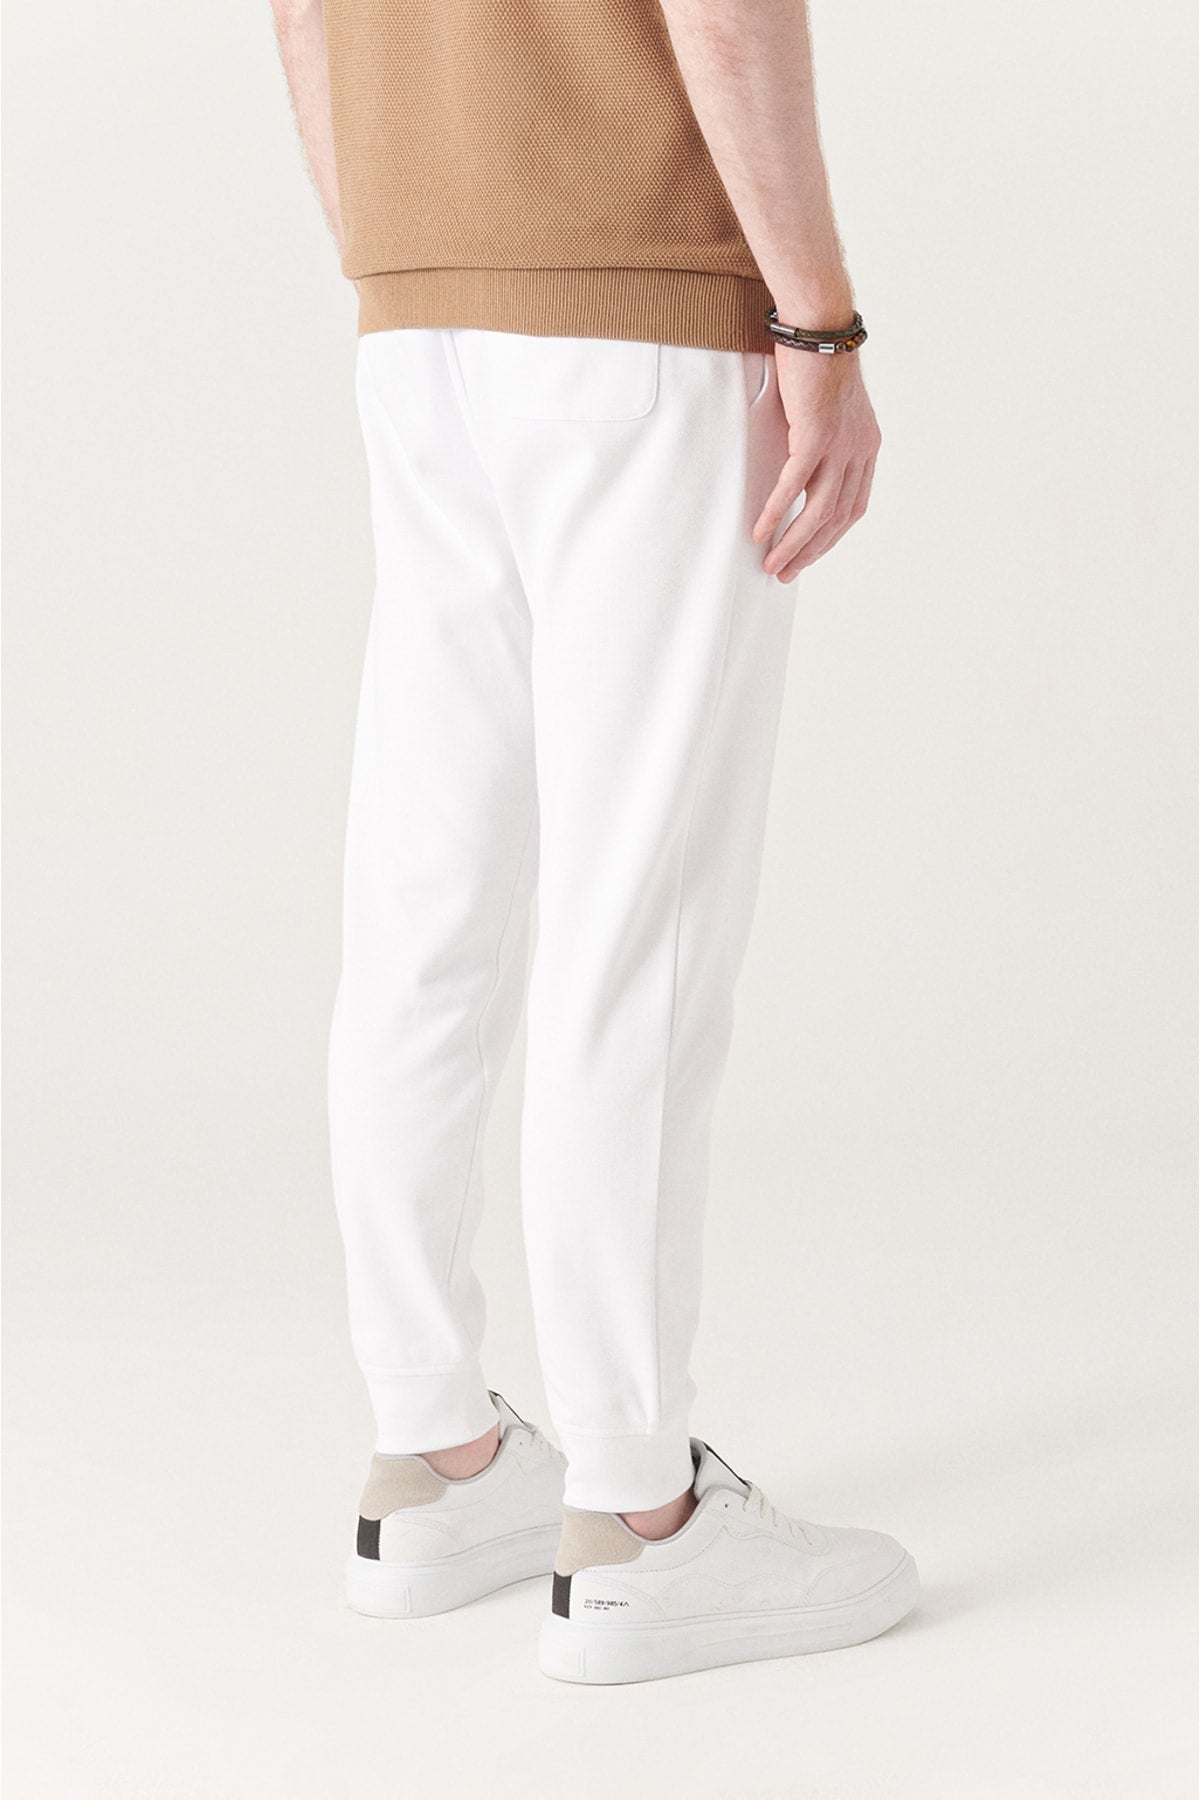 Men's white textured jogger A21y3409